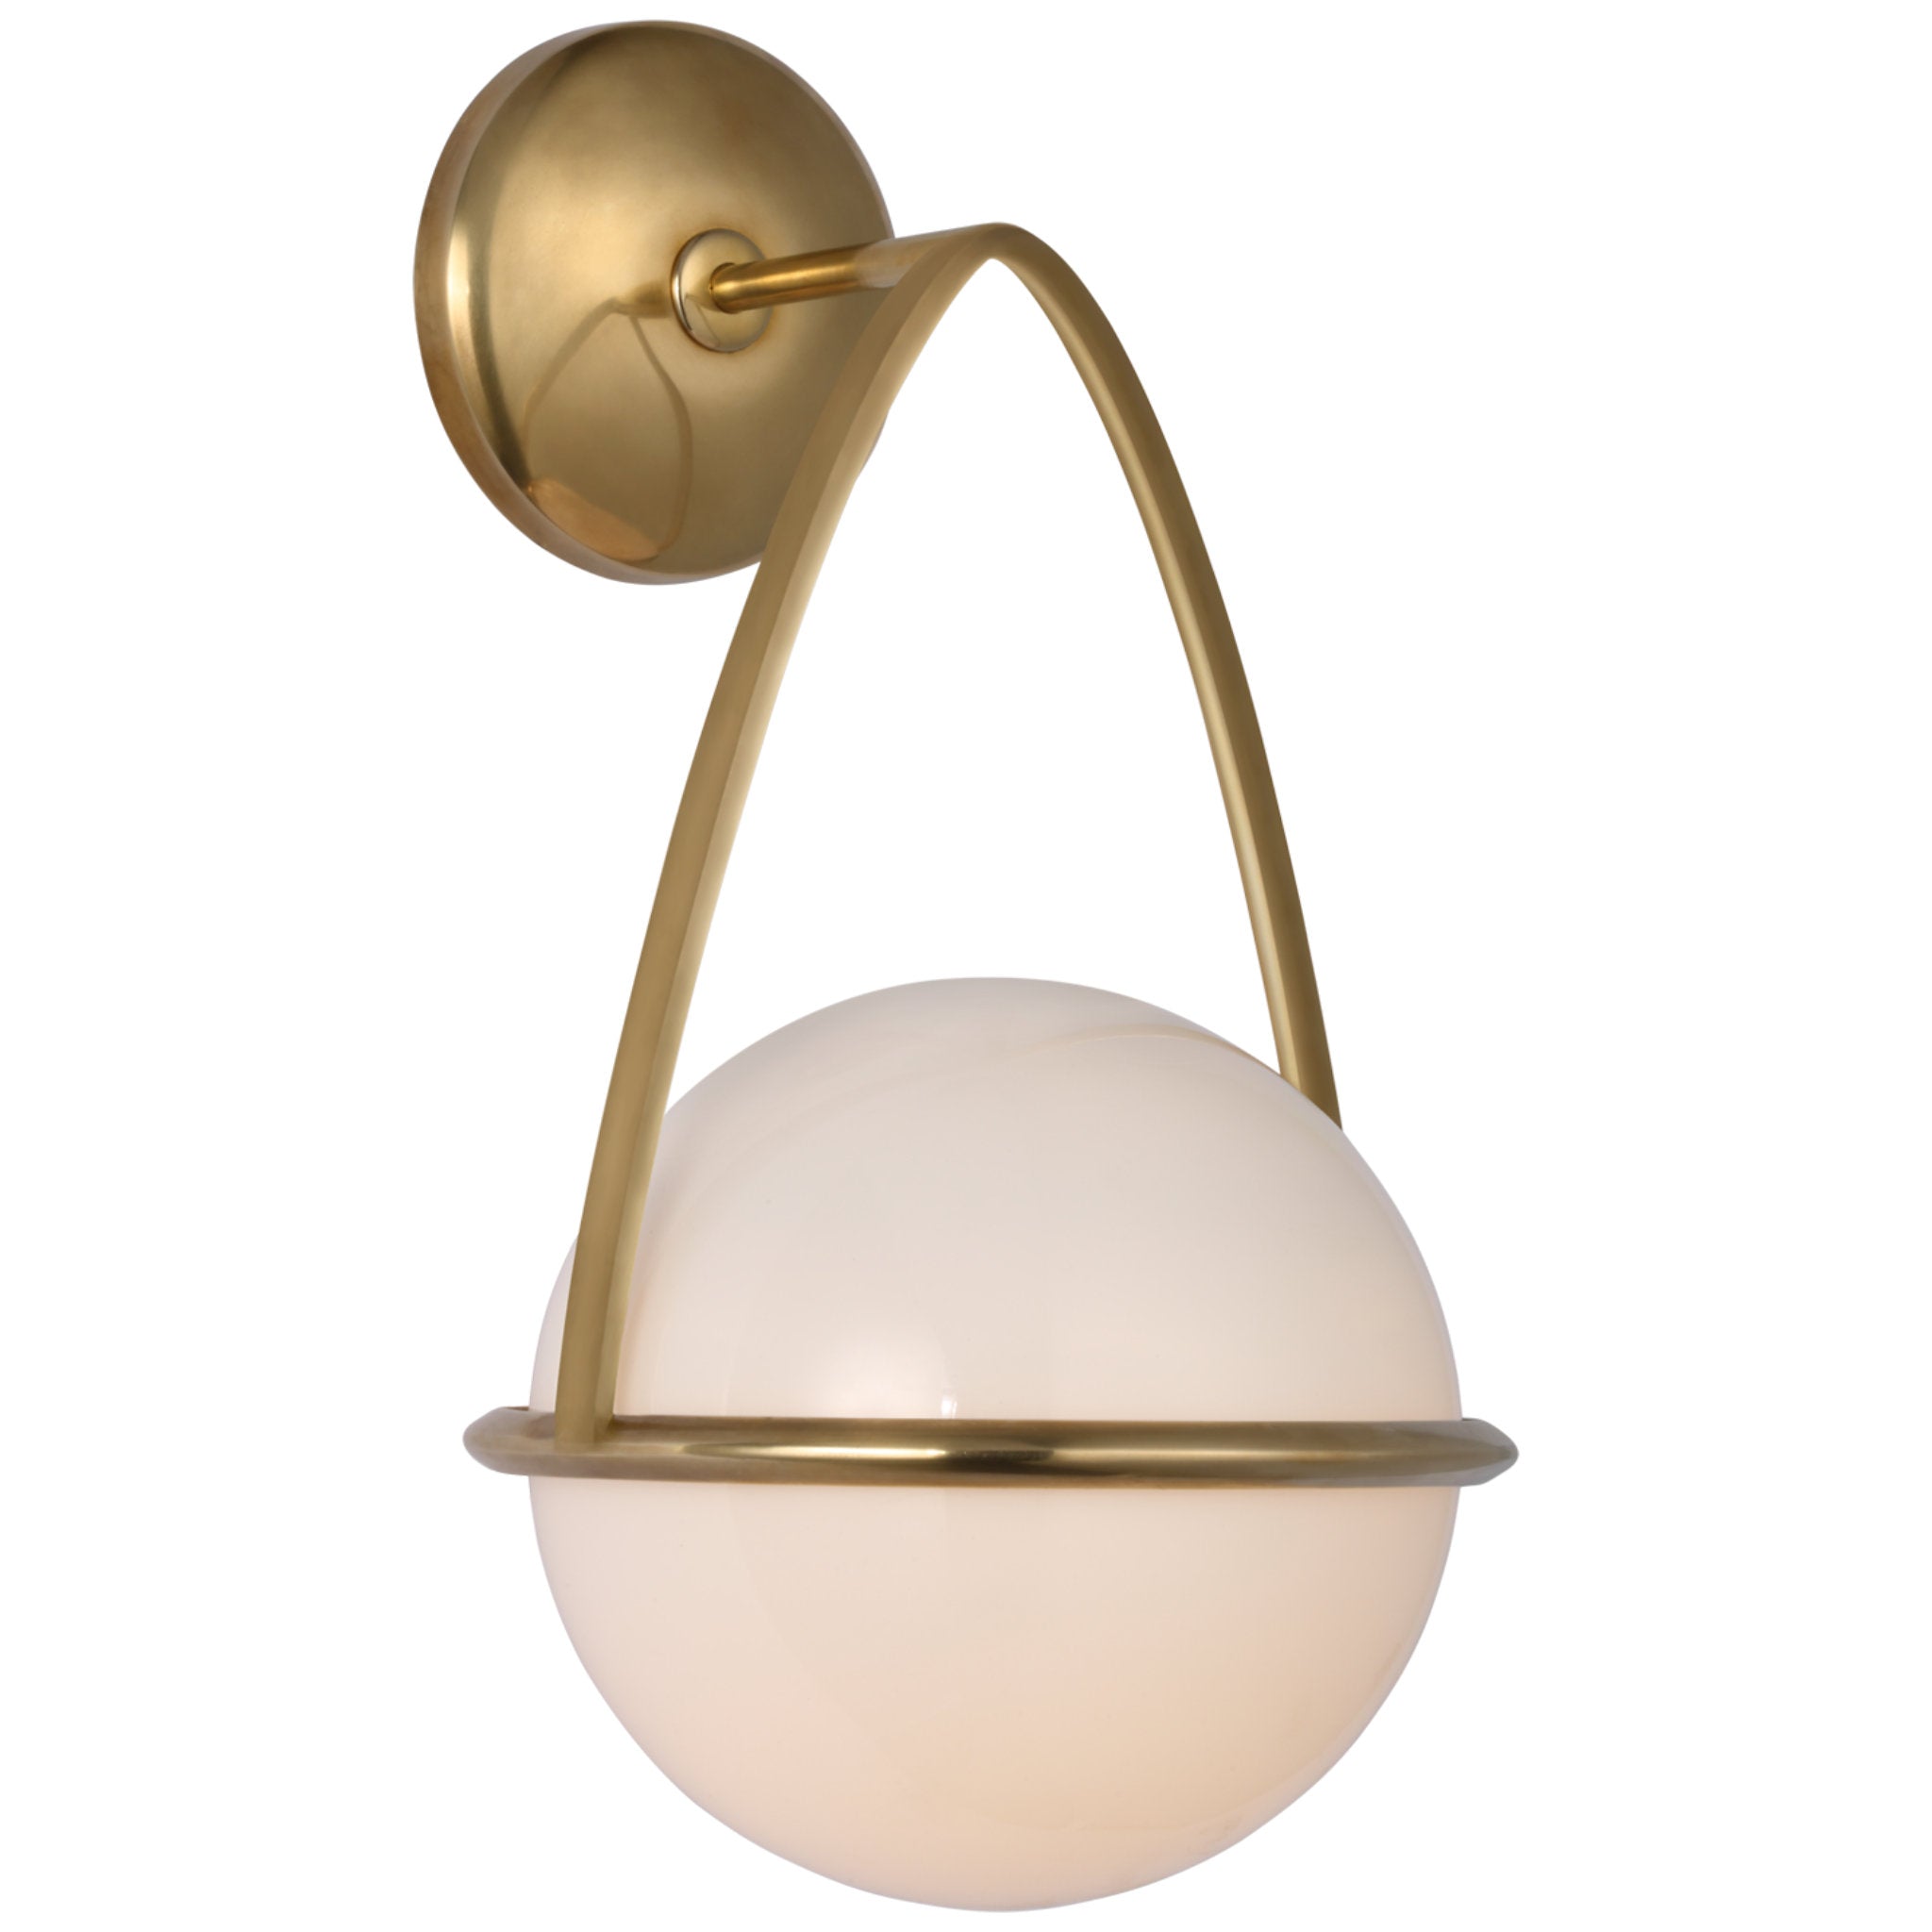 Clemente Double Sconce in Hand-Rubbed Antique Brass, Visual Comfort